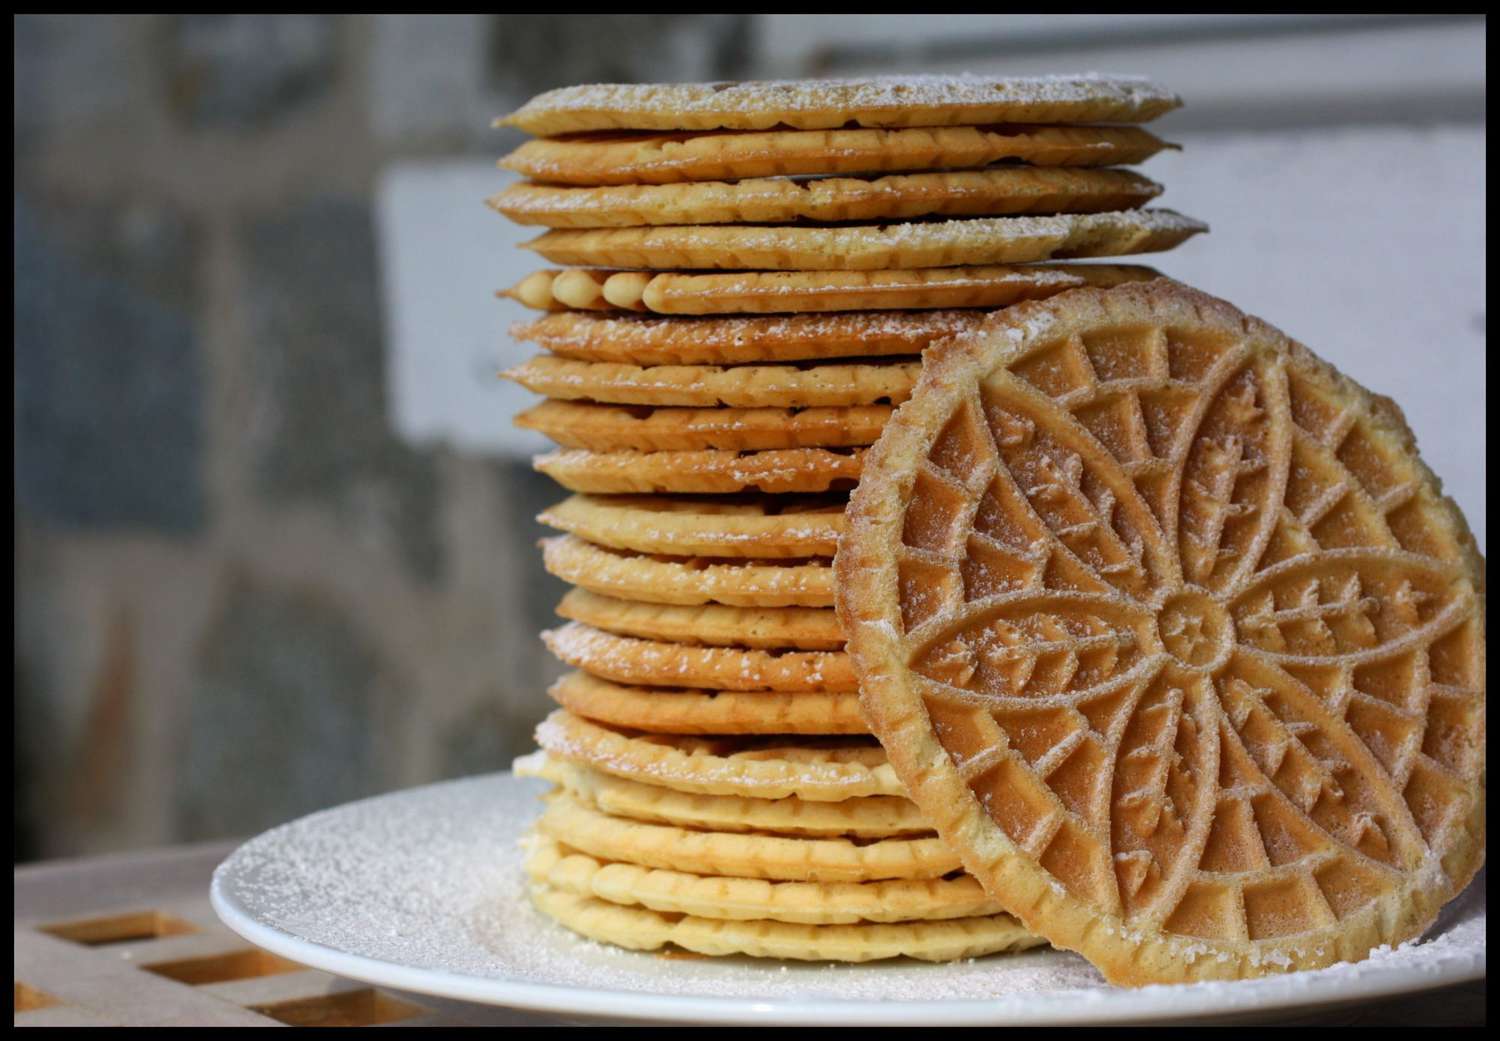 A tall stack of wafer cookies on a white plate, with one turned sideways to show off the flower design